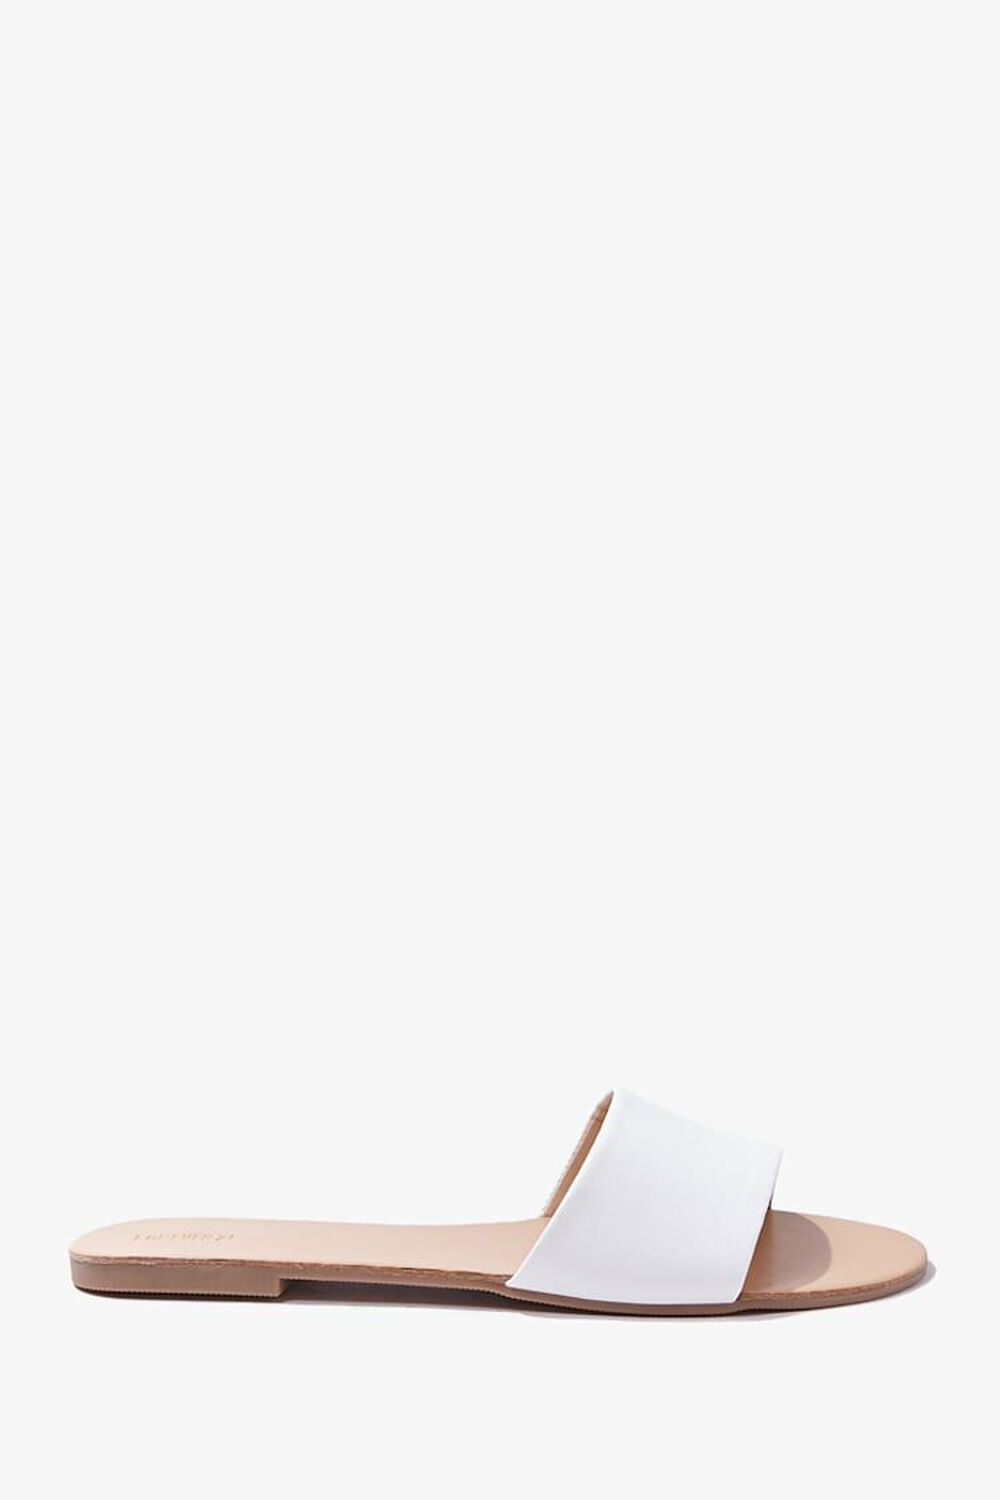 WHITE Faux Leather Sandals, image 1